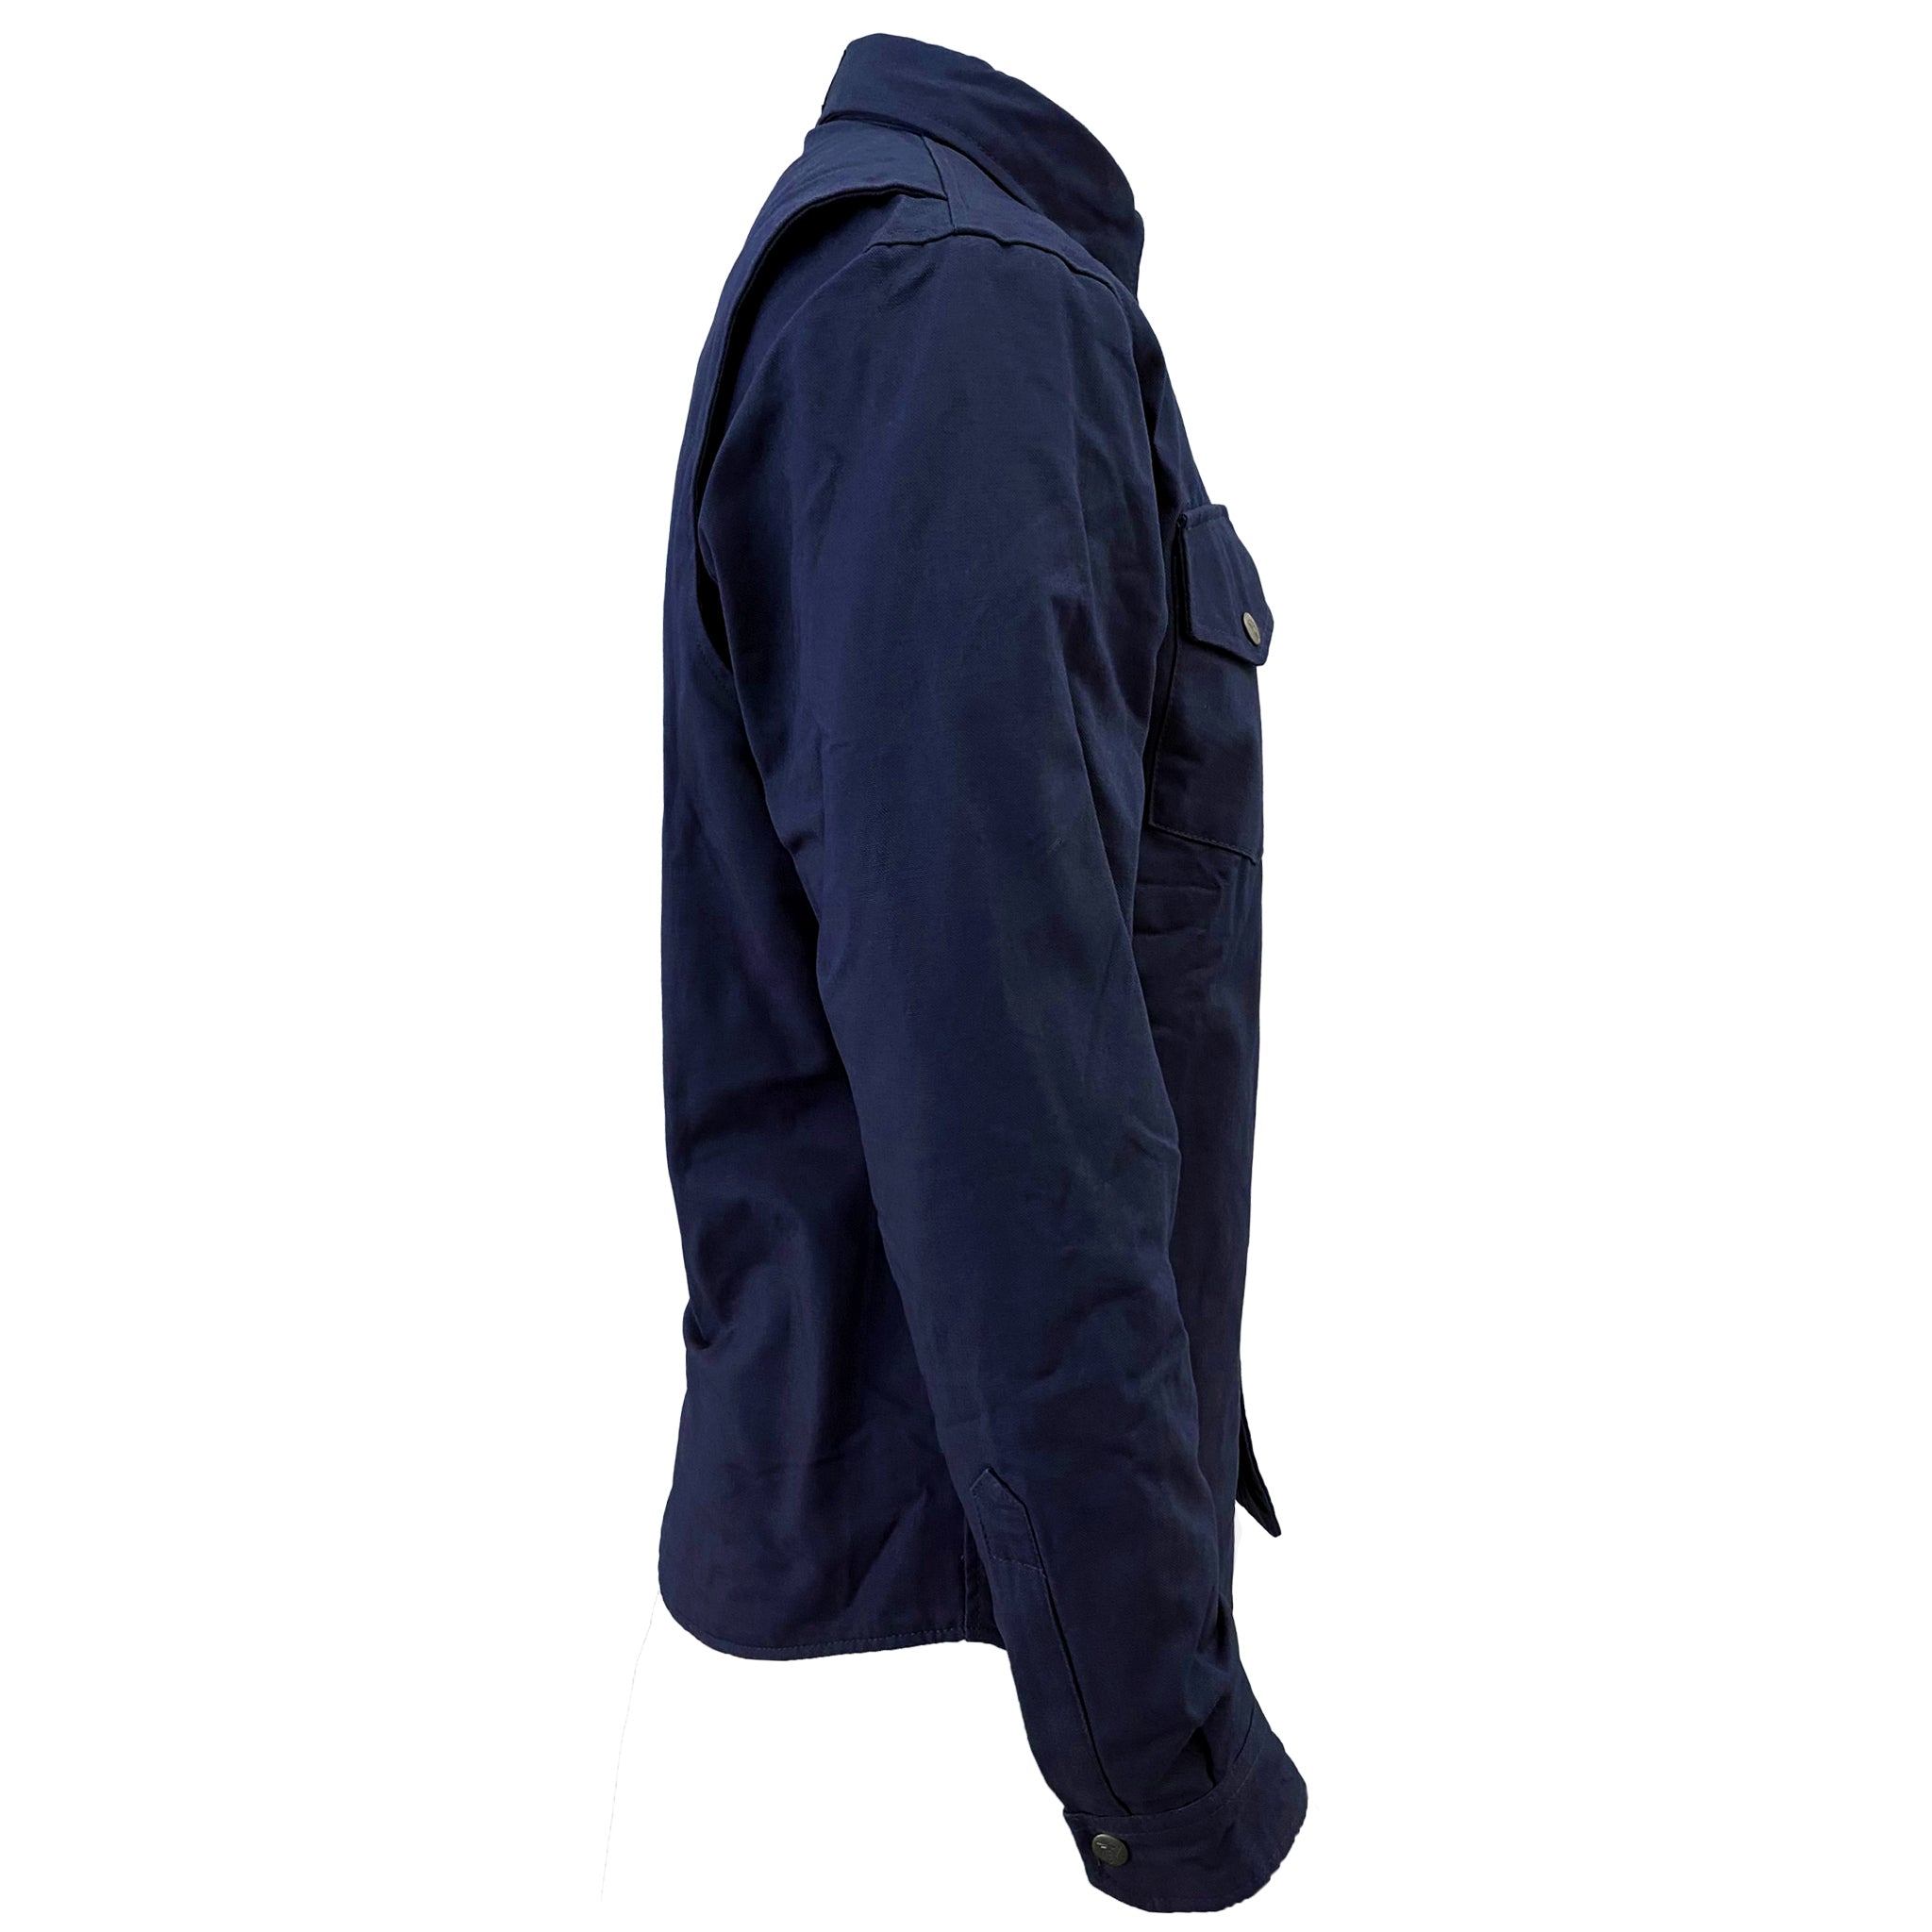 Men's-Canvas-Navy-Blue-Solid-Jacket-Right-Side